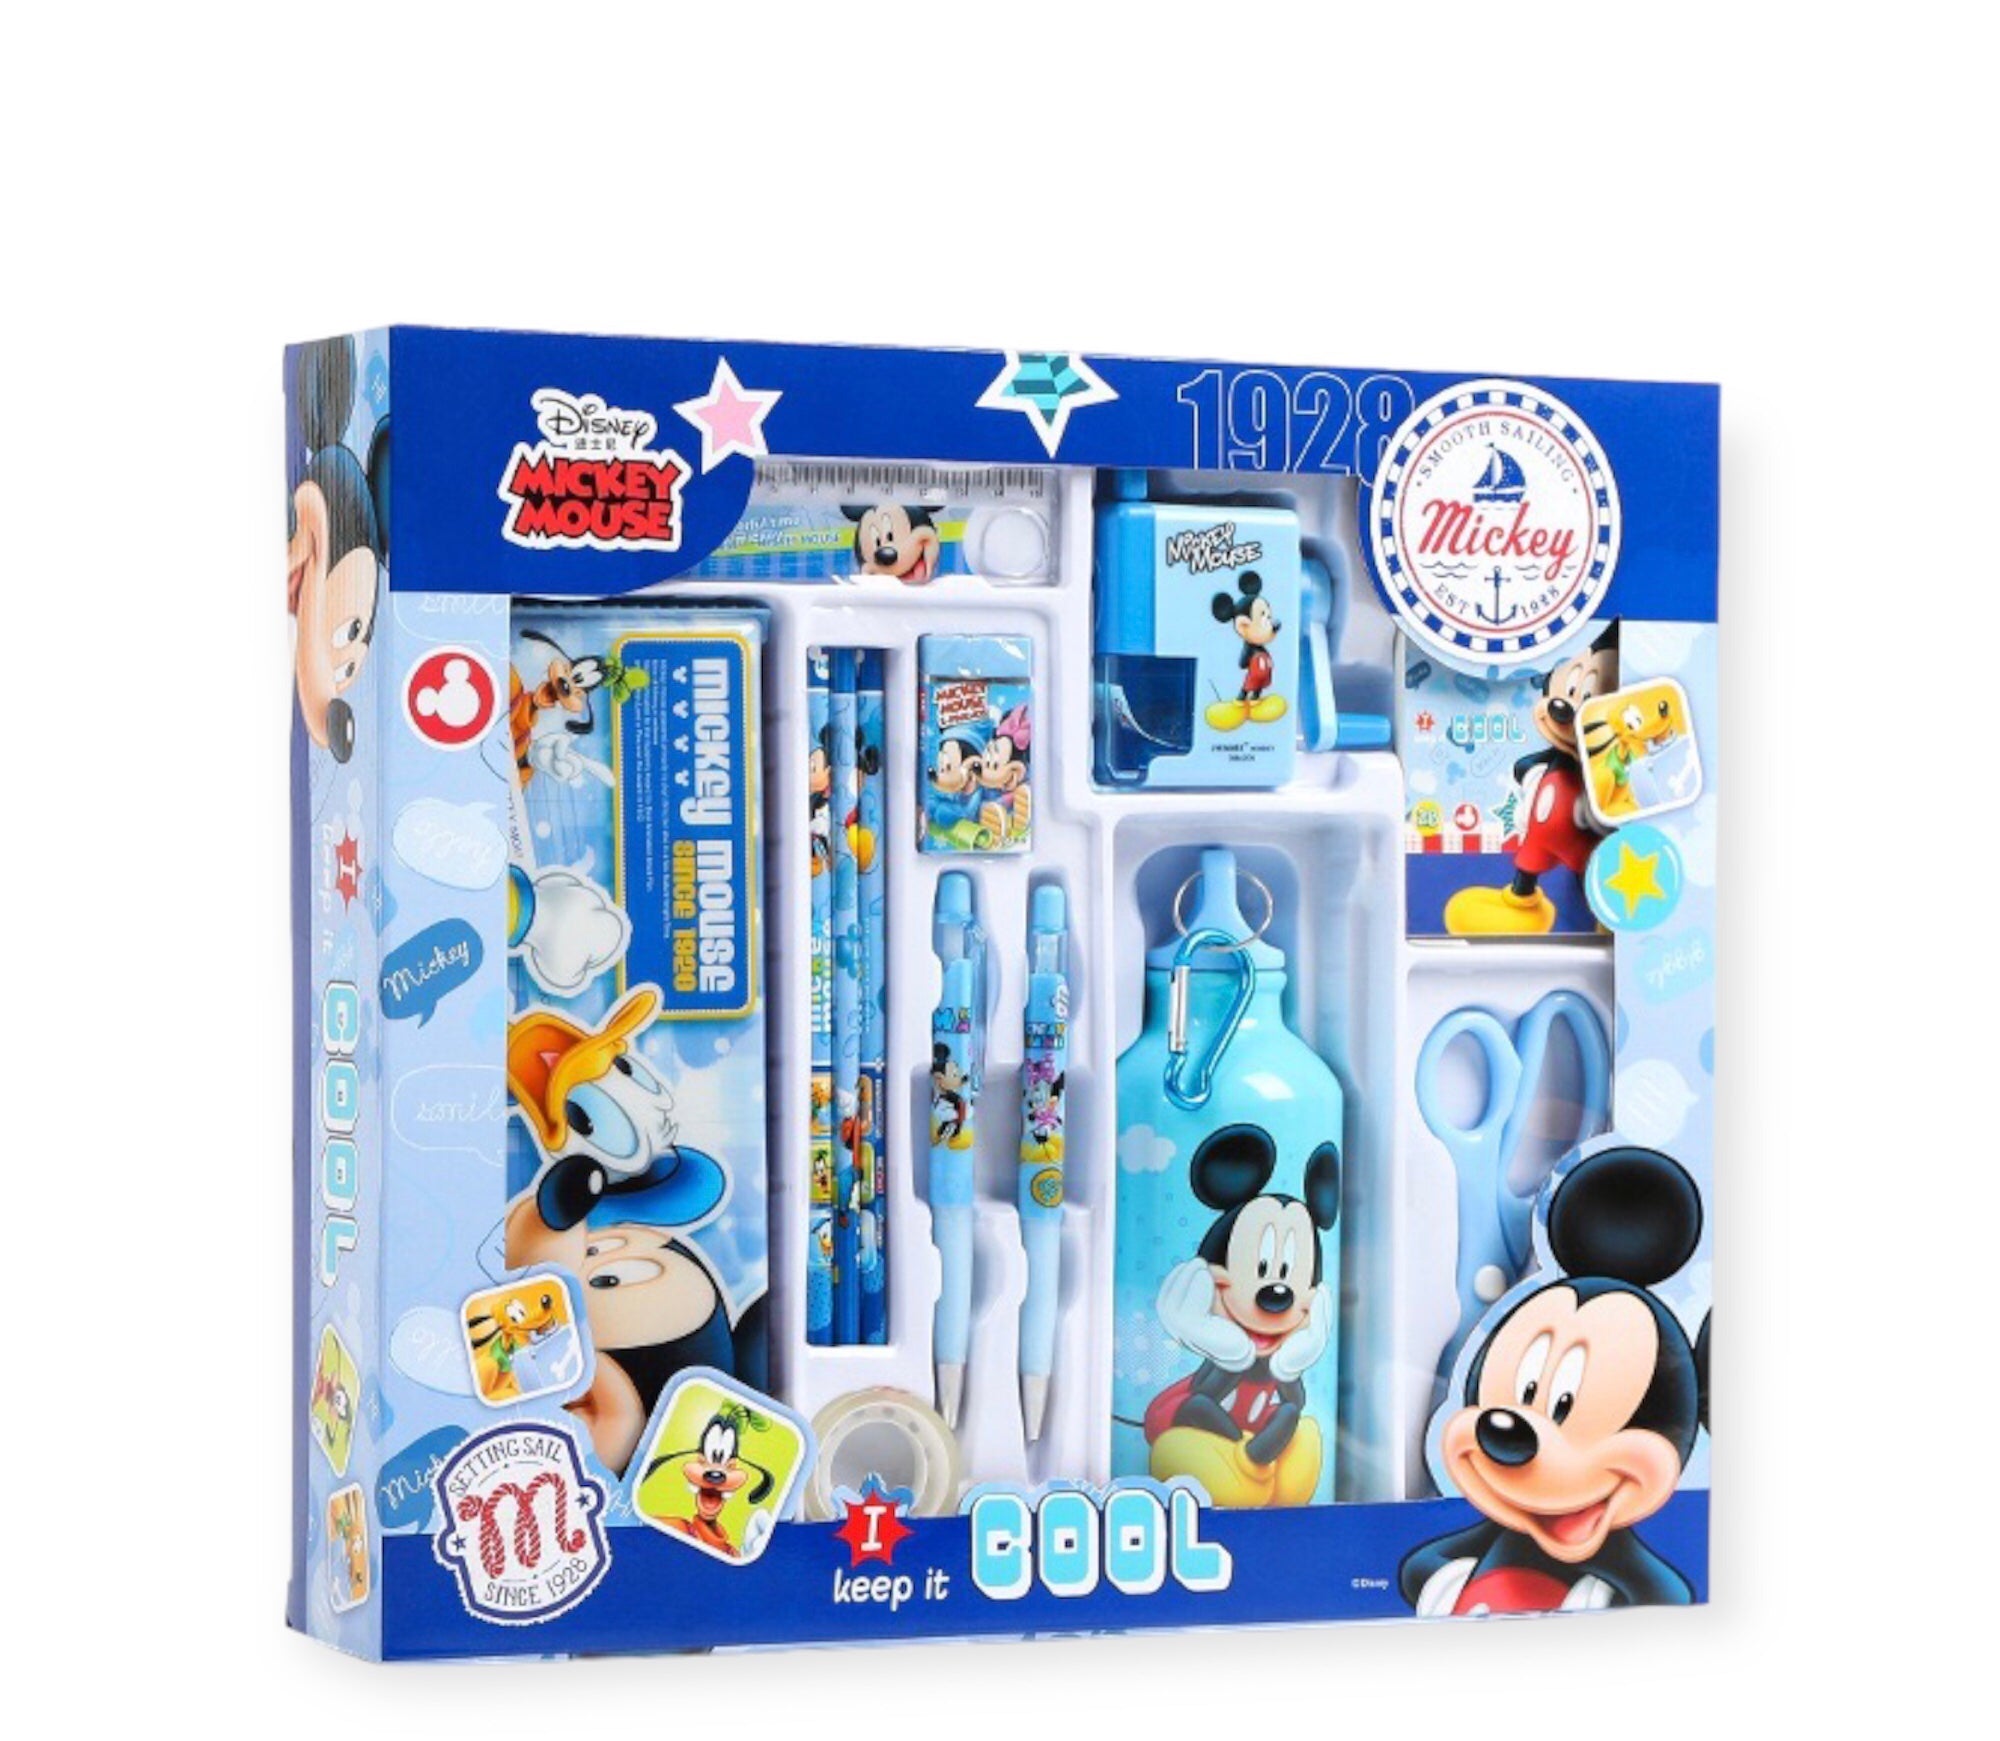 Mickey Stationary Set With Water bottle.